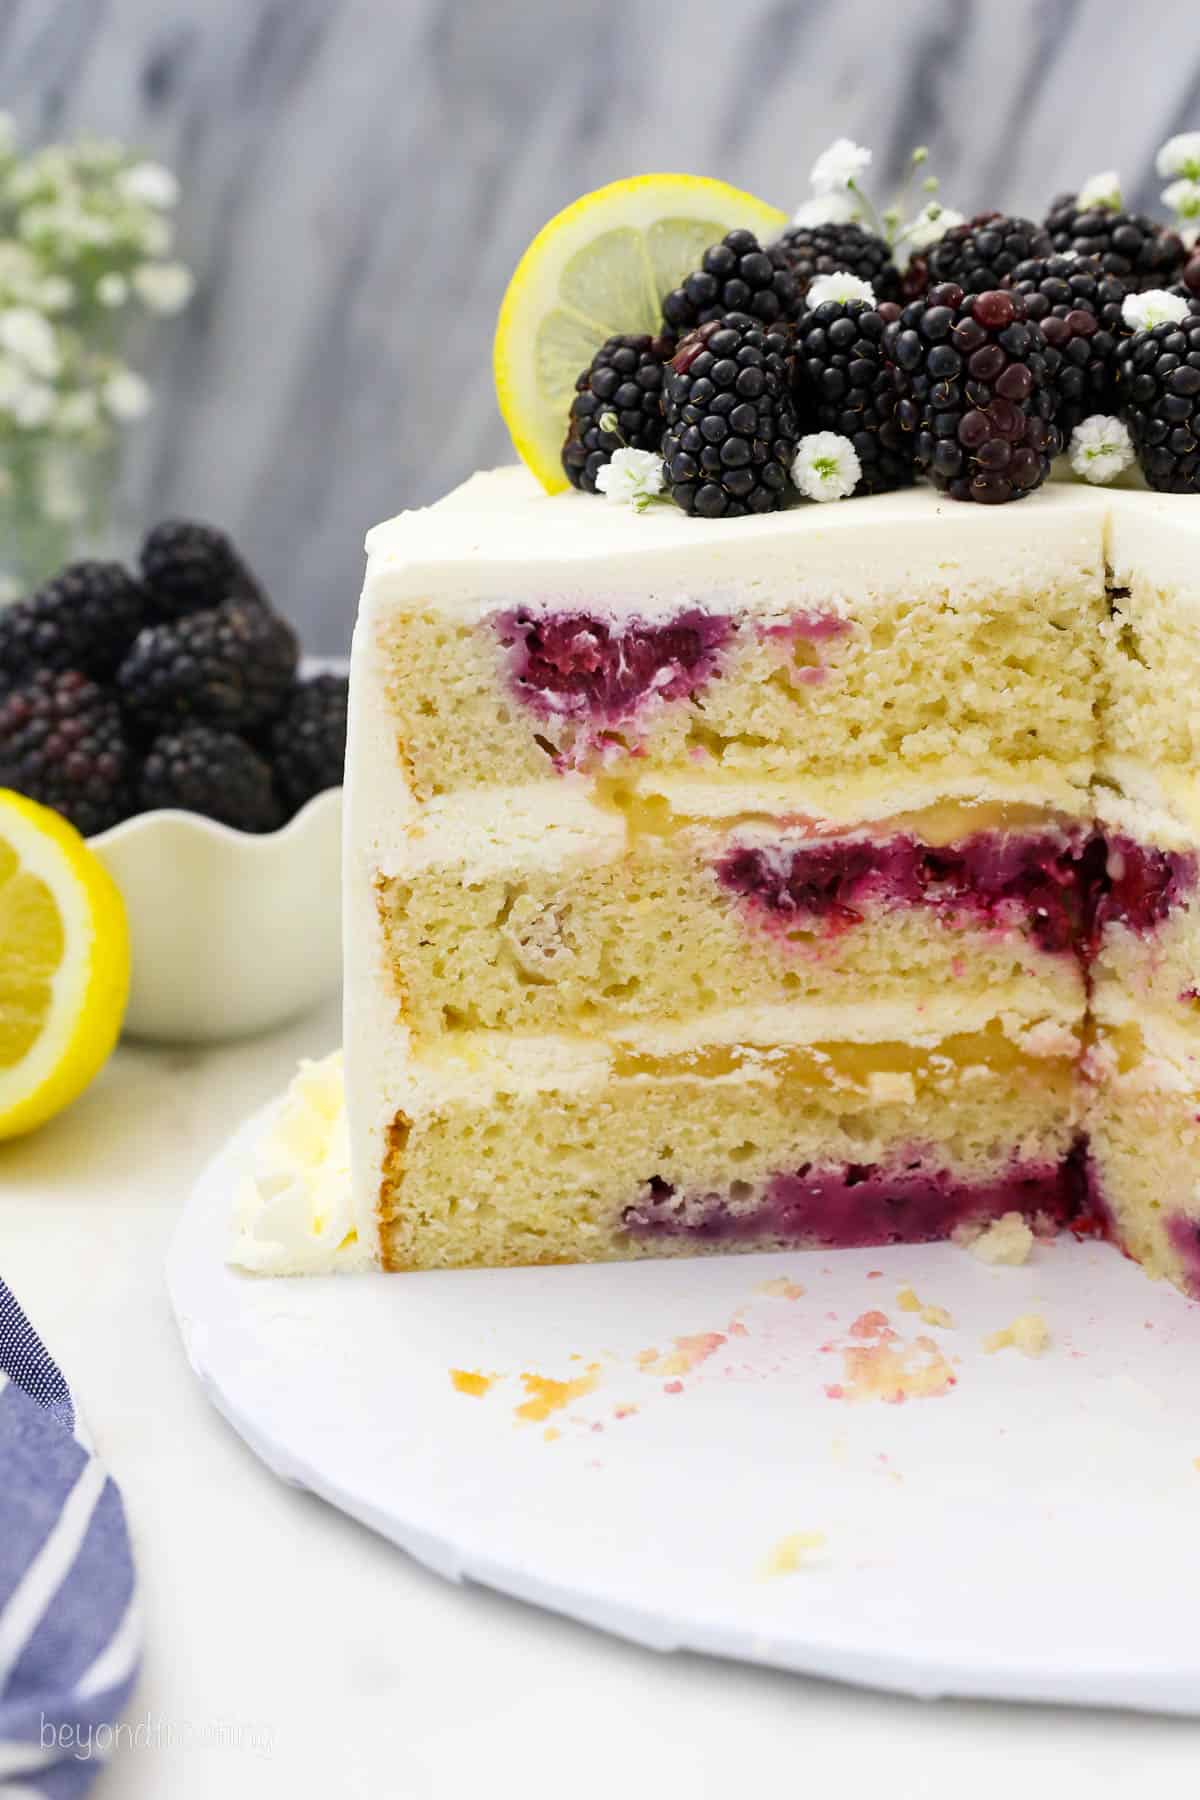 side view of a lemon cake with a slice cut out topped with fresh blackberries and lemon.